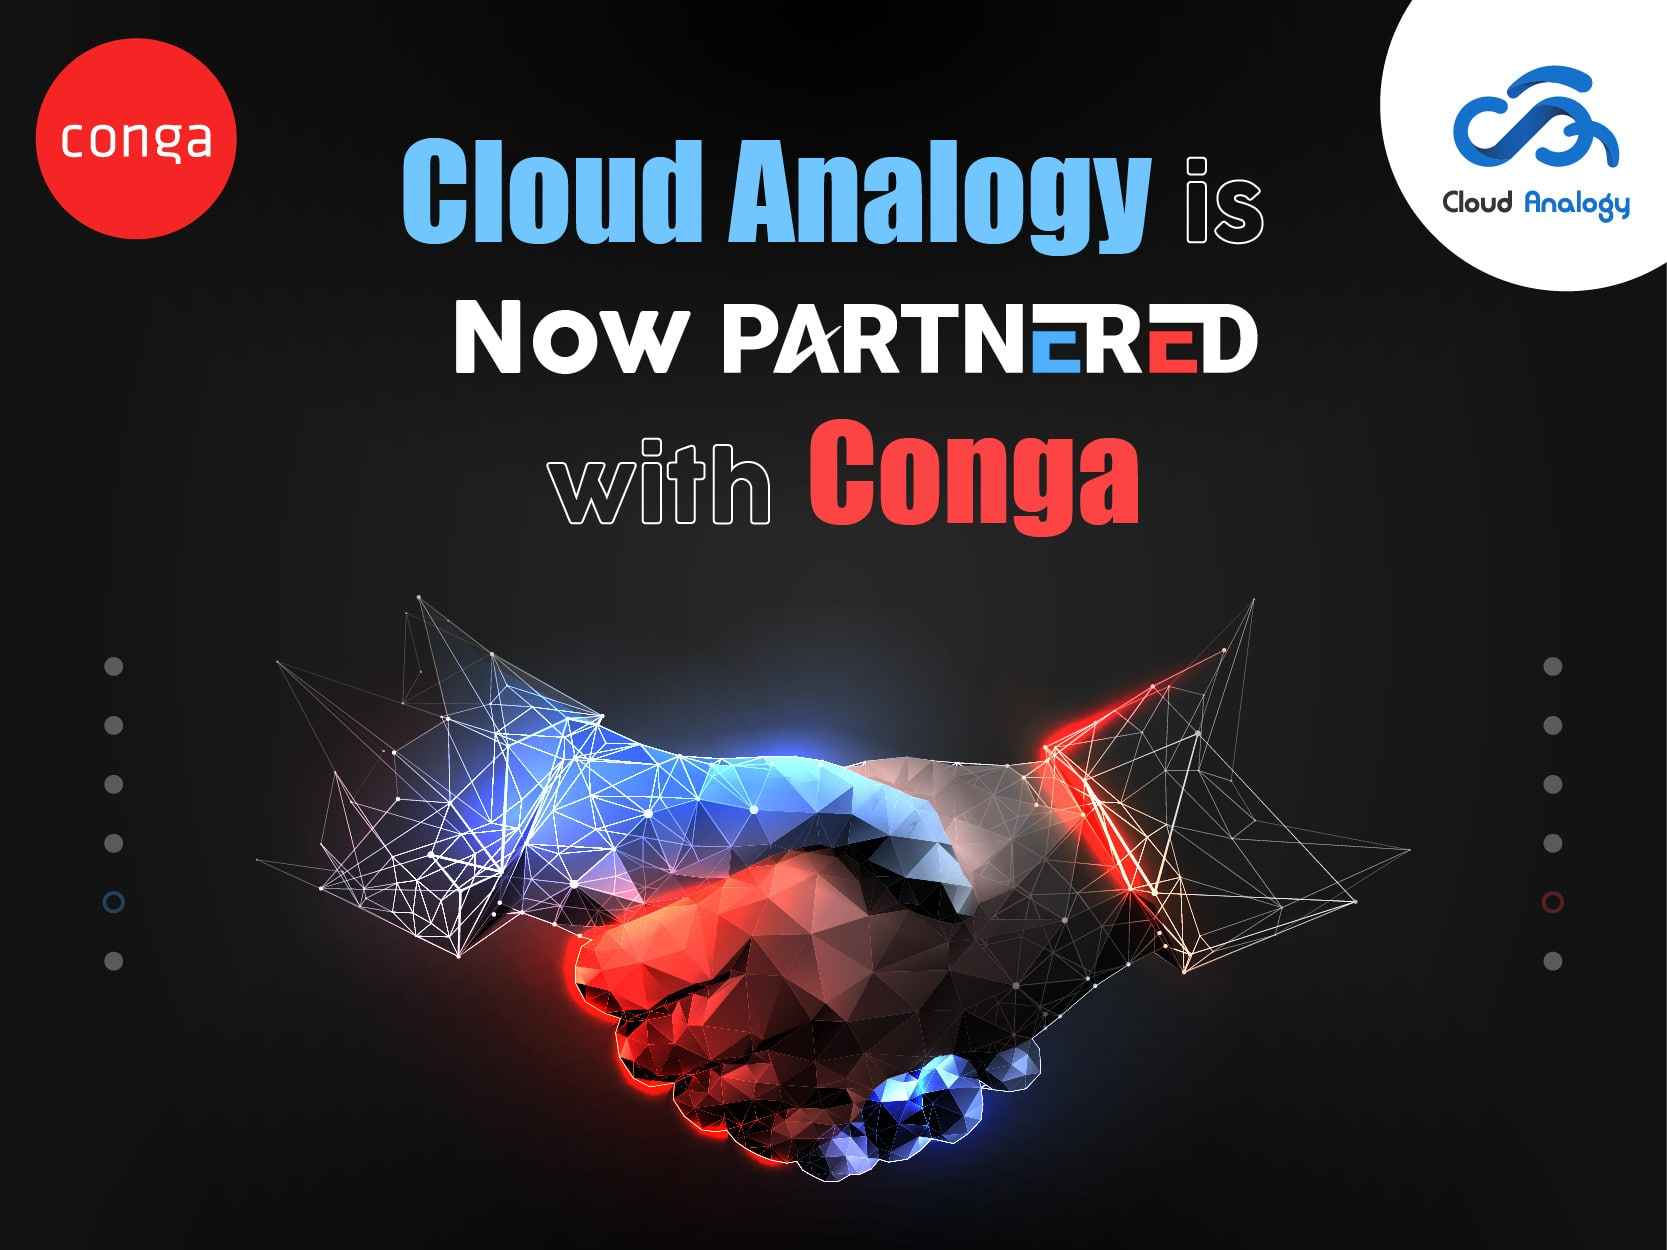 https://www.forpressrelease.com/forpressrelease/618295/21/cloud-analogy-is-now-partnered-with-conga